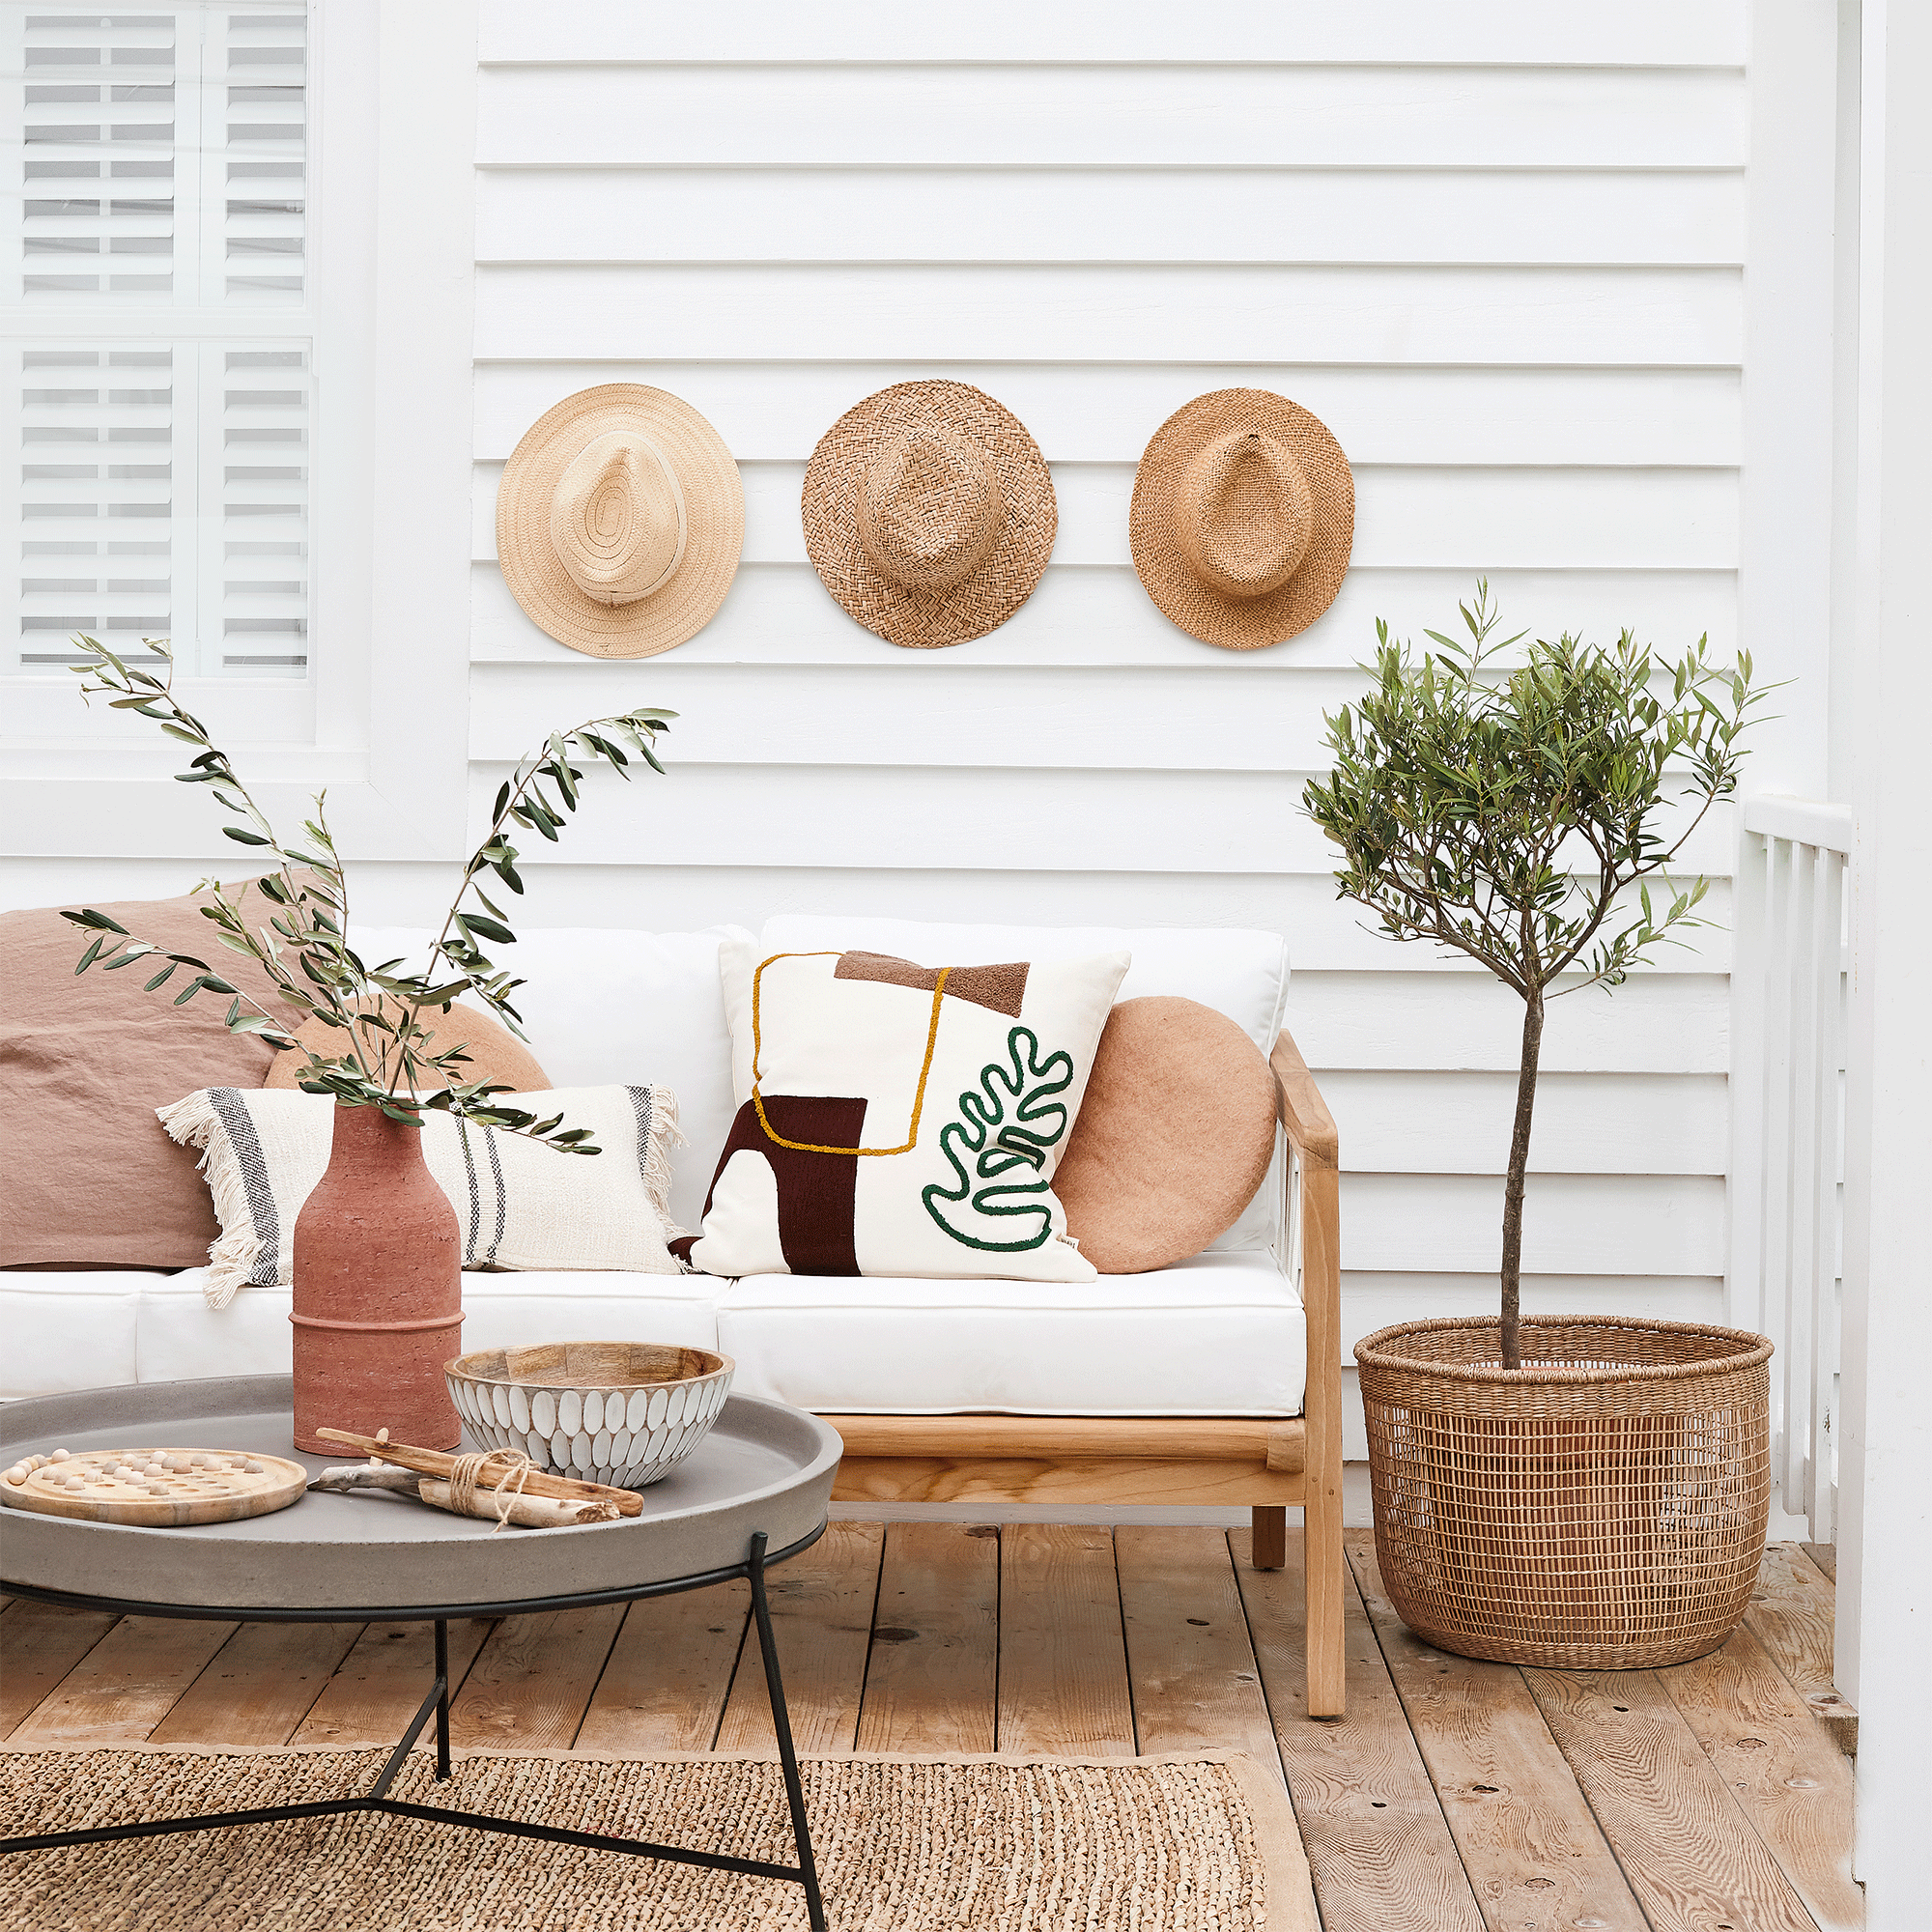 Garden trends - the key looks and ideas to bring your outdoor space into 2023